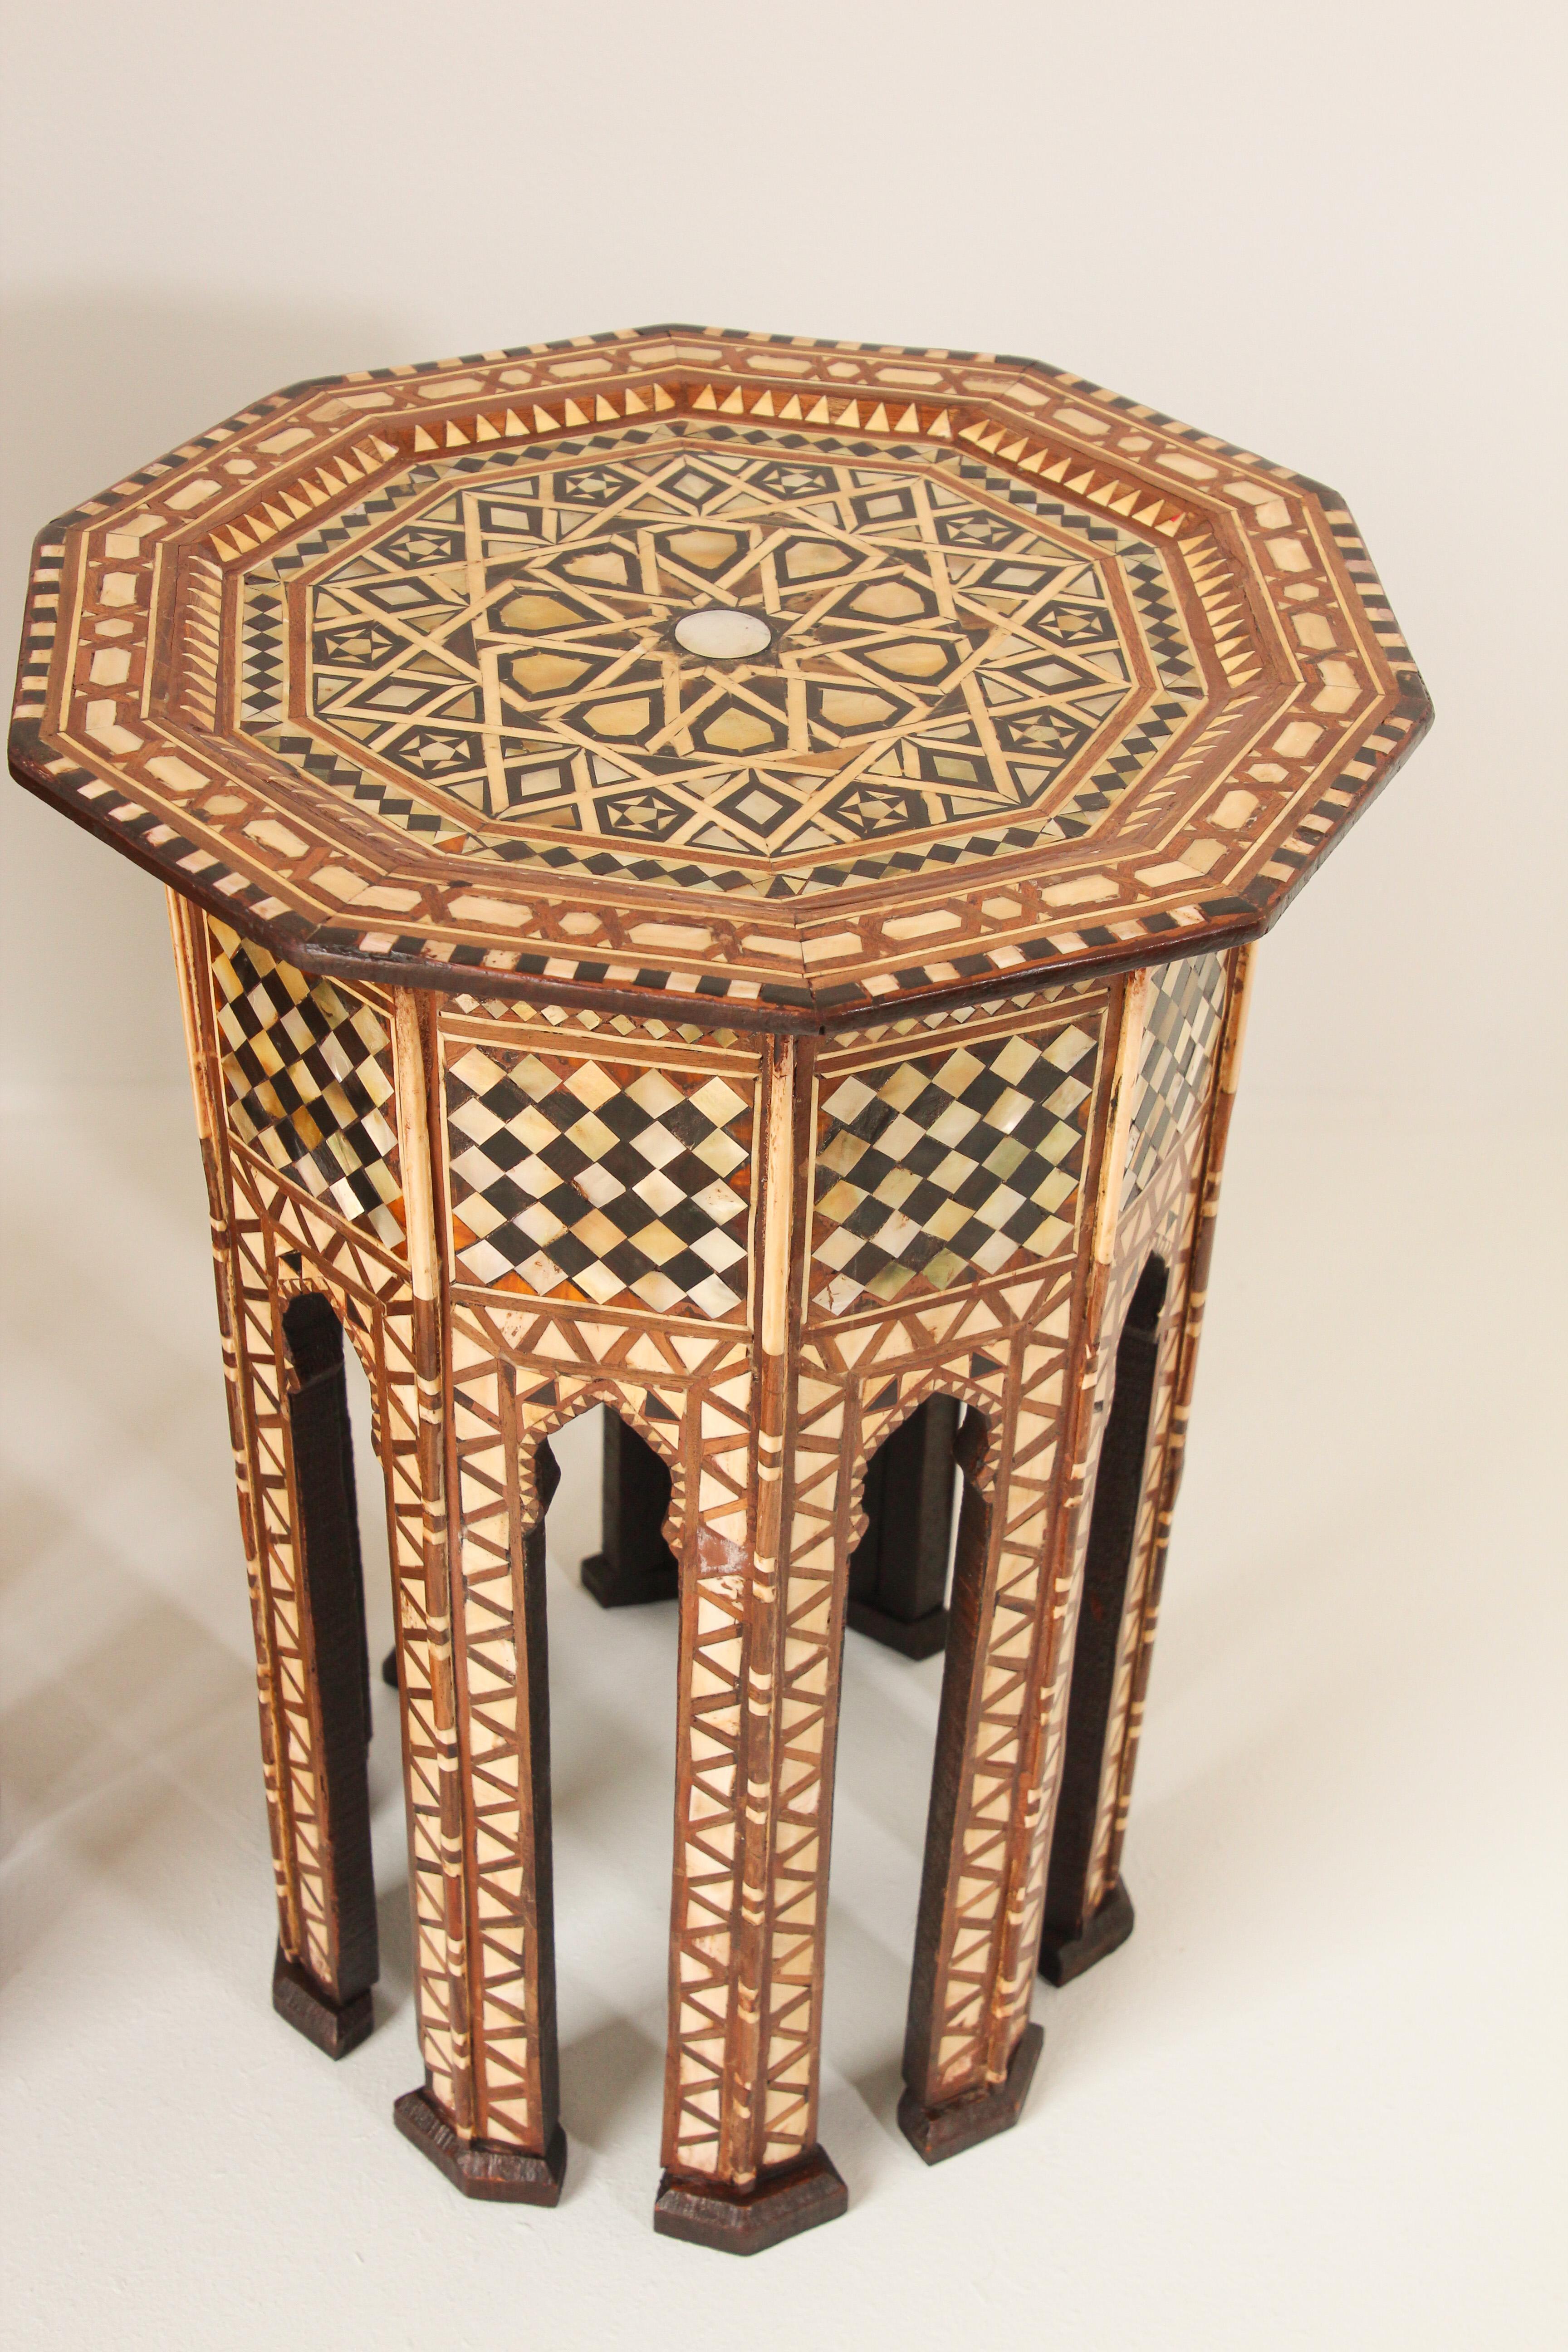 Middle East Syrian Octagonal Tables Inlaid 2